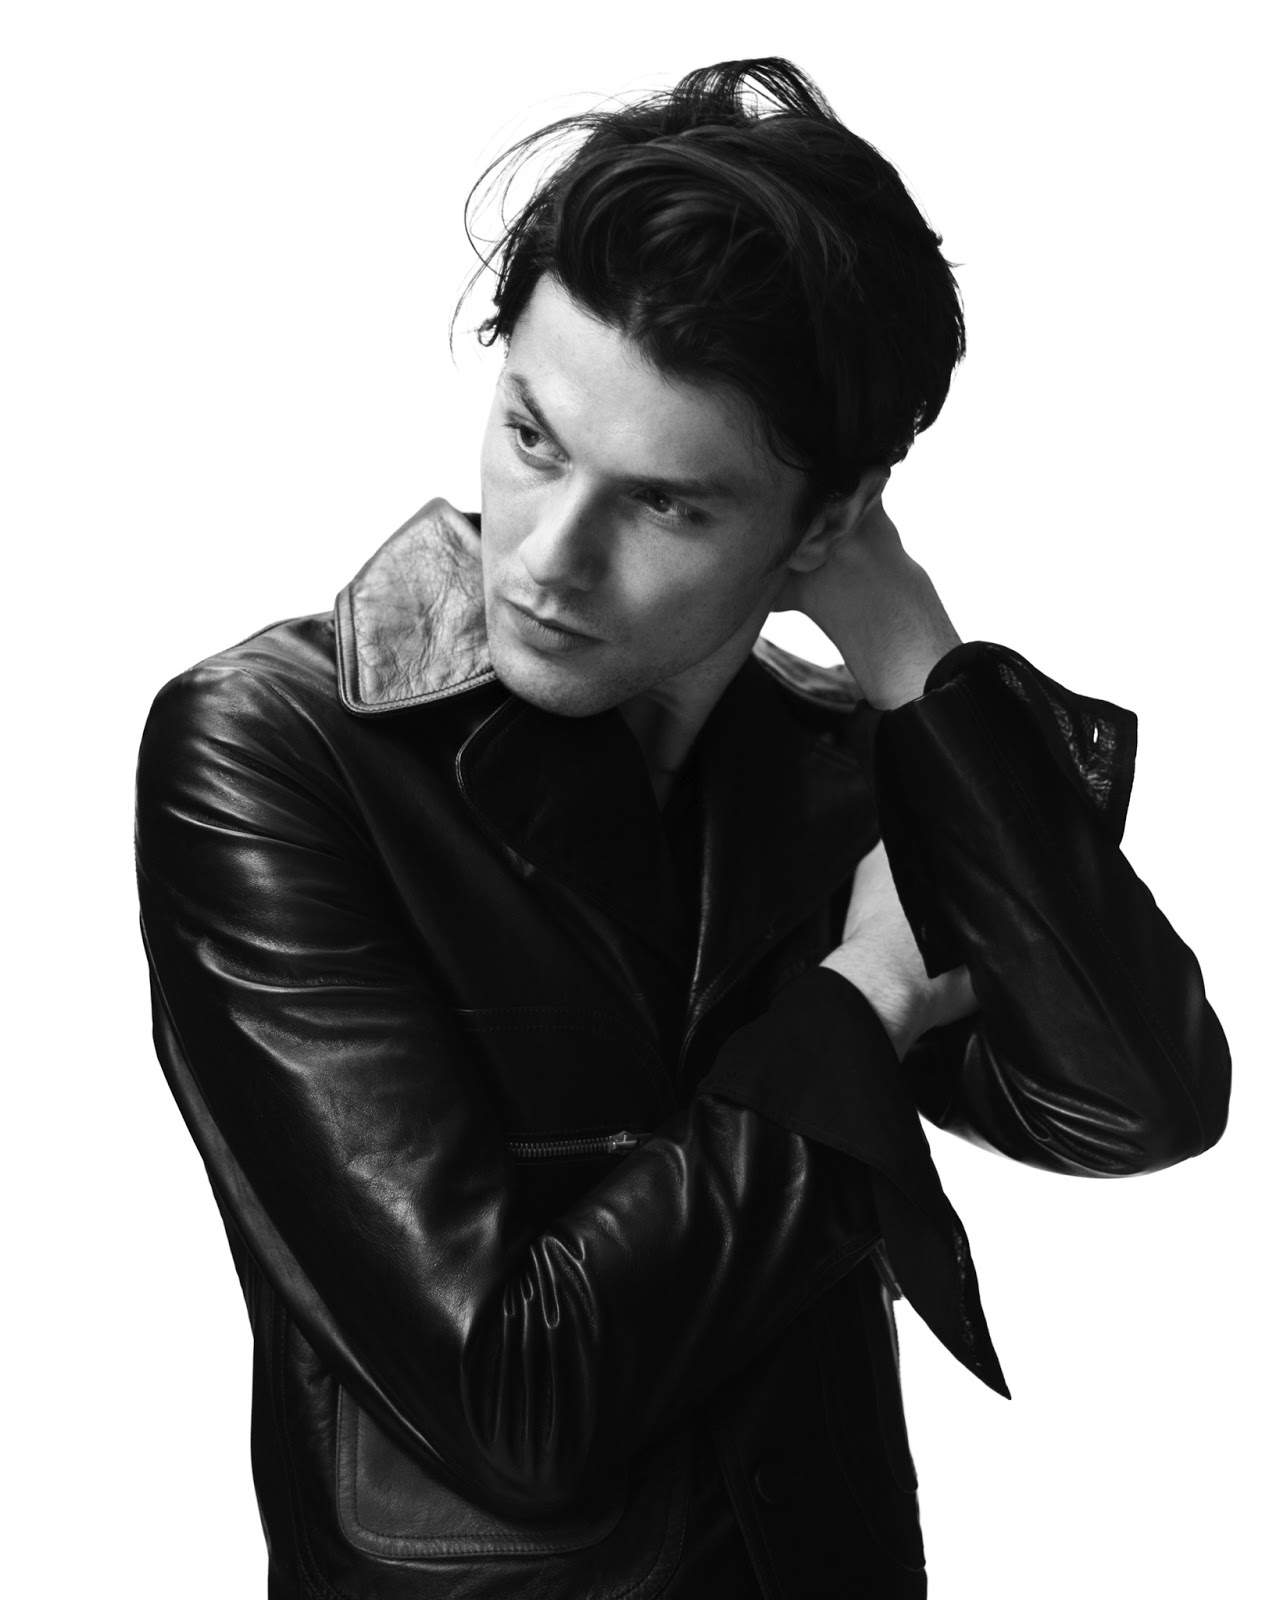 RETRO KIMMER'S BLOG: JAMES BAY UNVEILS ACOUSTIC VERSION OF “JUST FOR ...